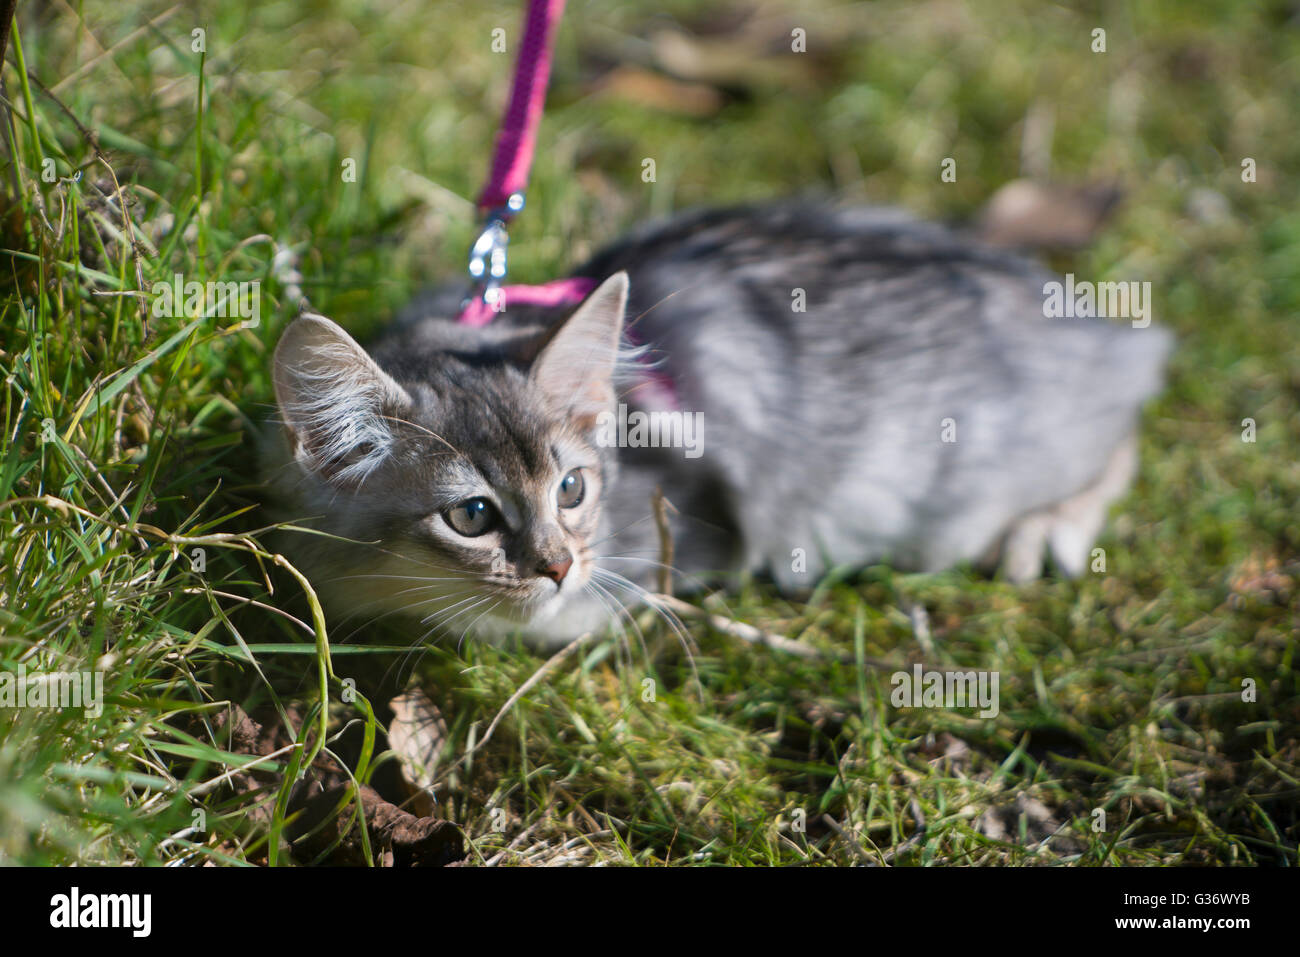 Young Somali longhair breed kitten in garden - on a harness and lead for safety Stock Photo